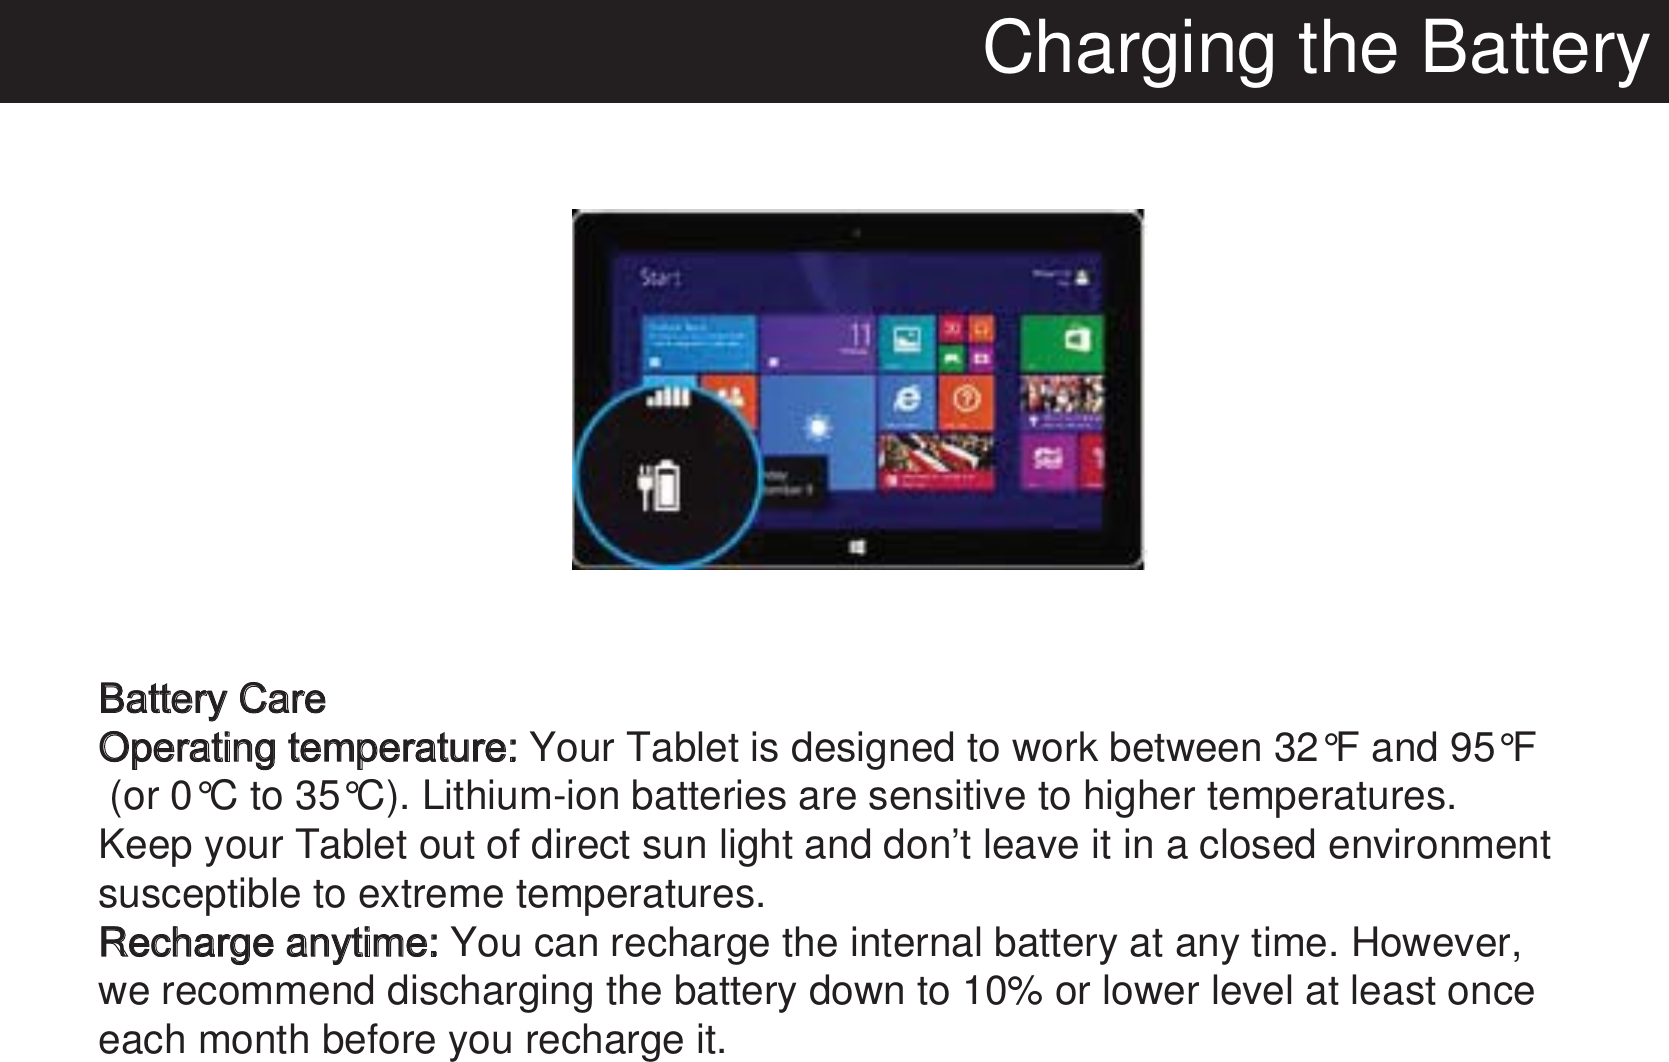 Charging the BatteryBattery CareOperating temperature: Your Tablet is designed to work between 32°F and 95°F (or 0°C to 35°C). Lithium-ion batteries are sensitive to higher temperatures. Keep your Tablet out of direct sun light and don’t leave it in a closed environment susceptible to extreme temperatures.Recharge anytime: You can recharge the internal battery at any time. However, we recommend discharging the battery down to 10% or lower level at least once each month before you recharge it. 